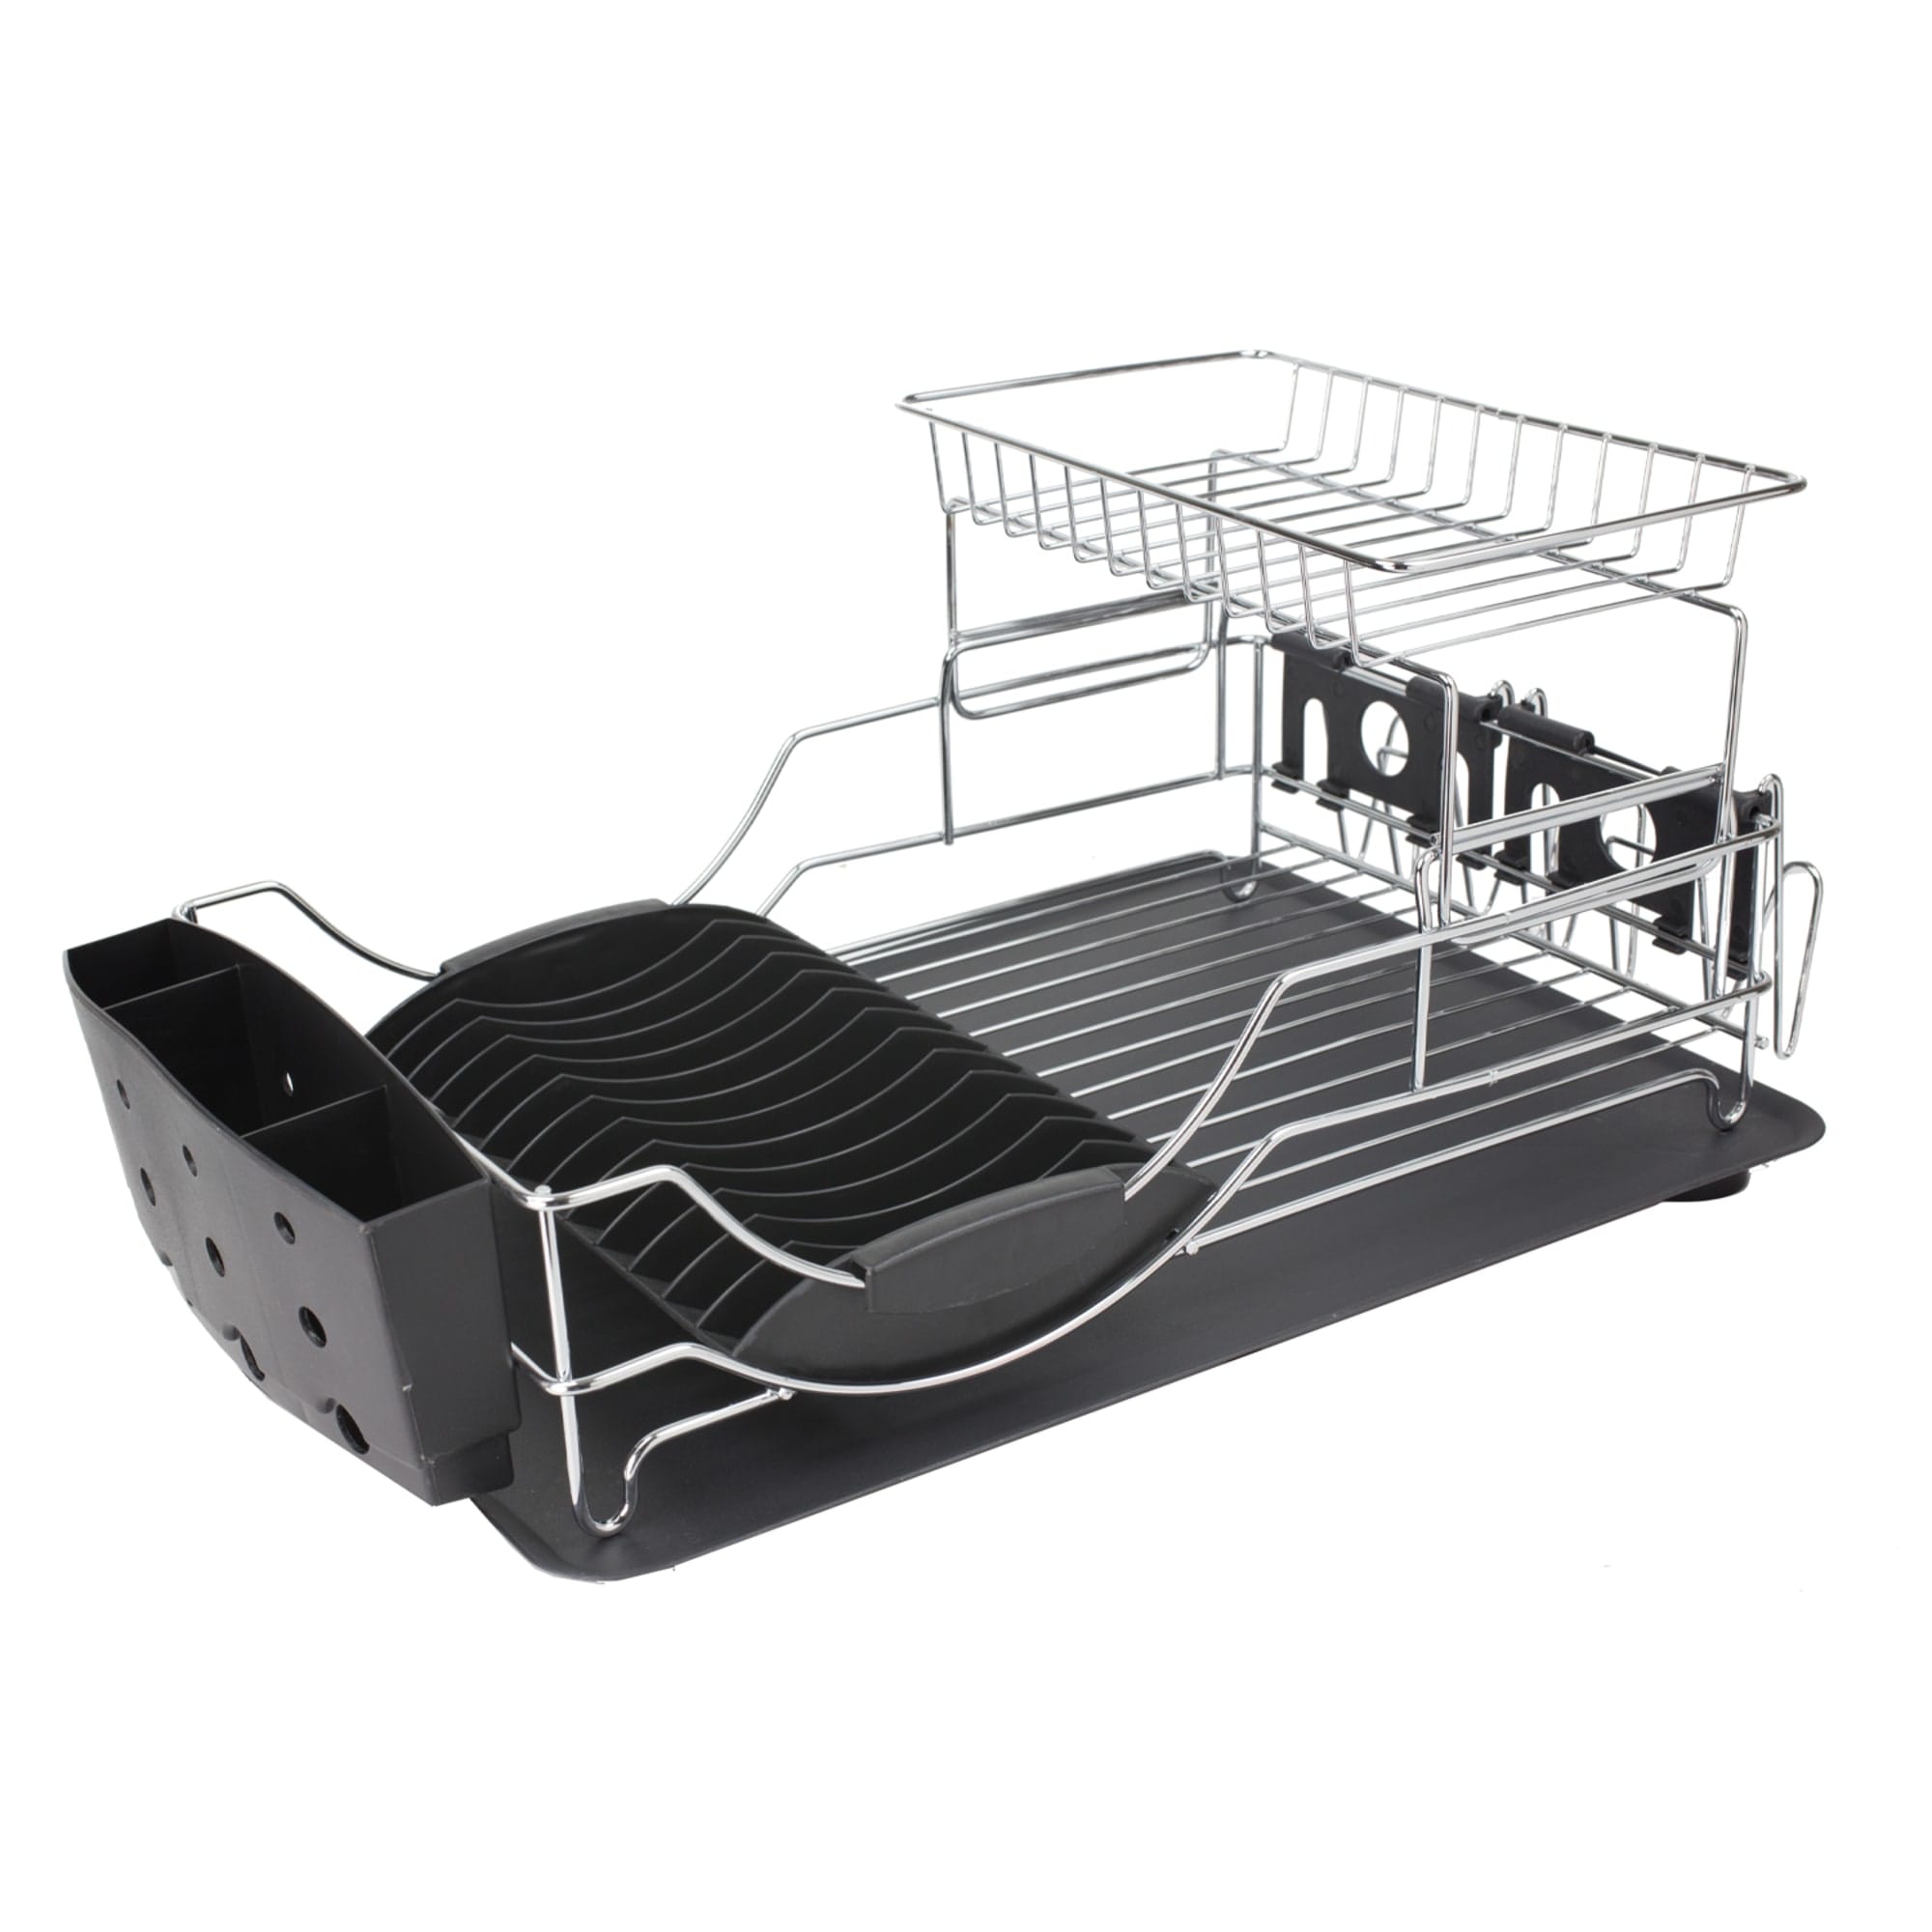 Home Basics 2-Tier Deluxe Dish Drainer $30.00 EACH, CASE PACK OF 6